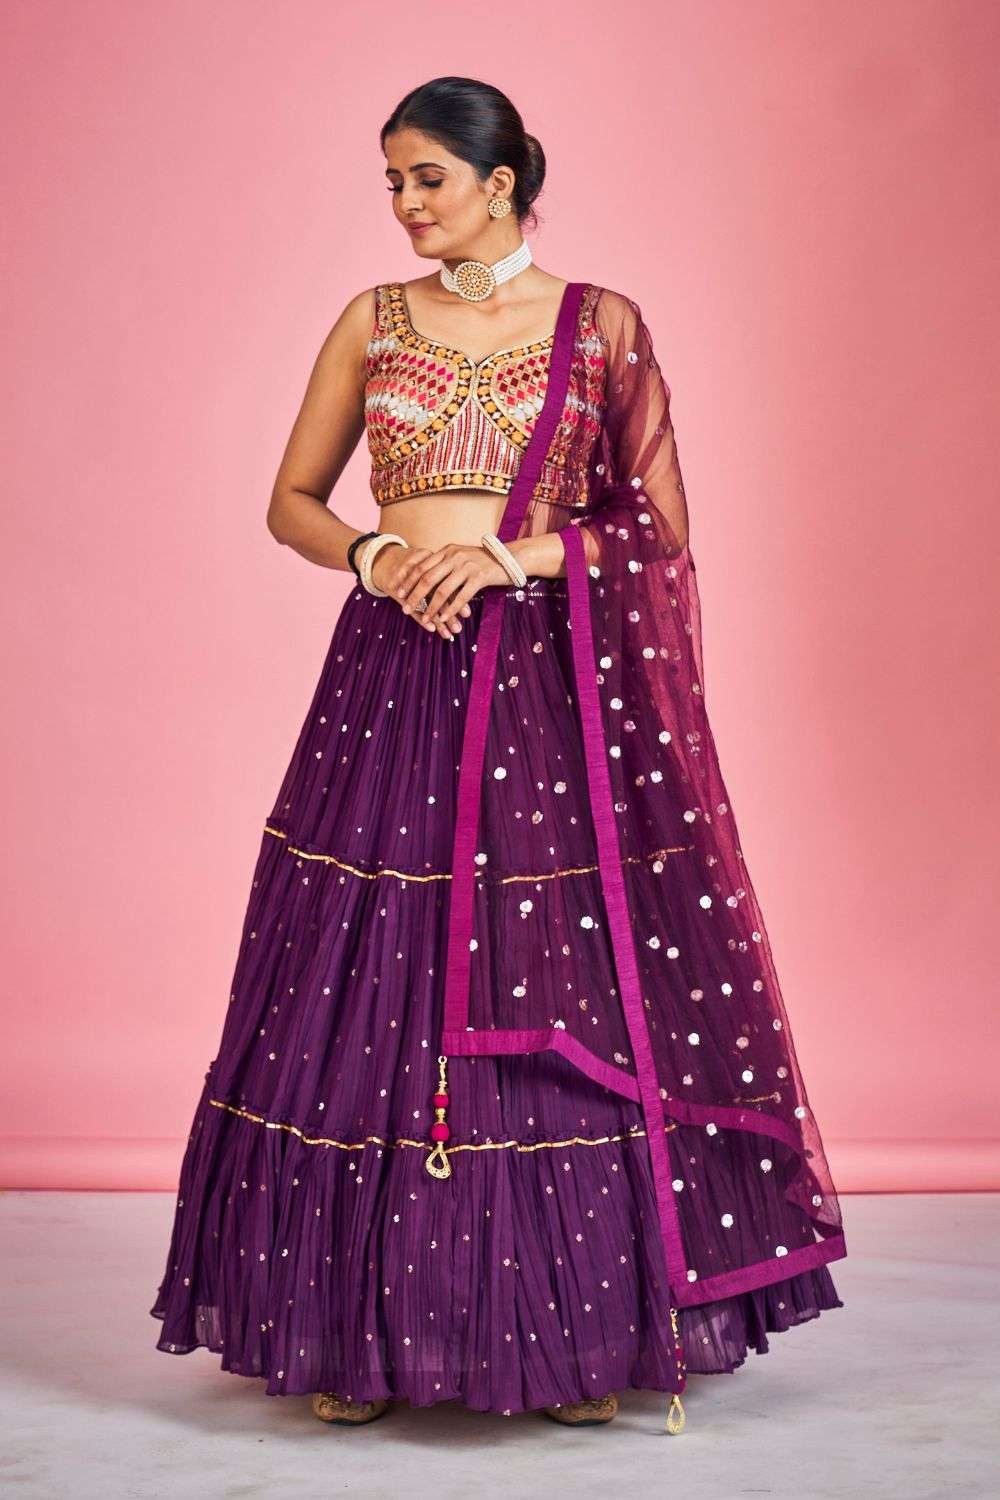 Buy Online Lehenga Blouse in Deep Red Embroidered Fabric LLCV110307